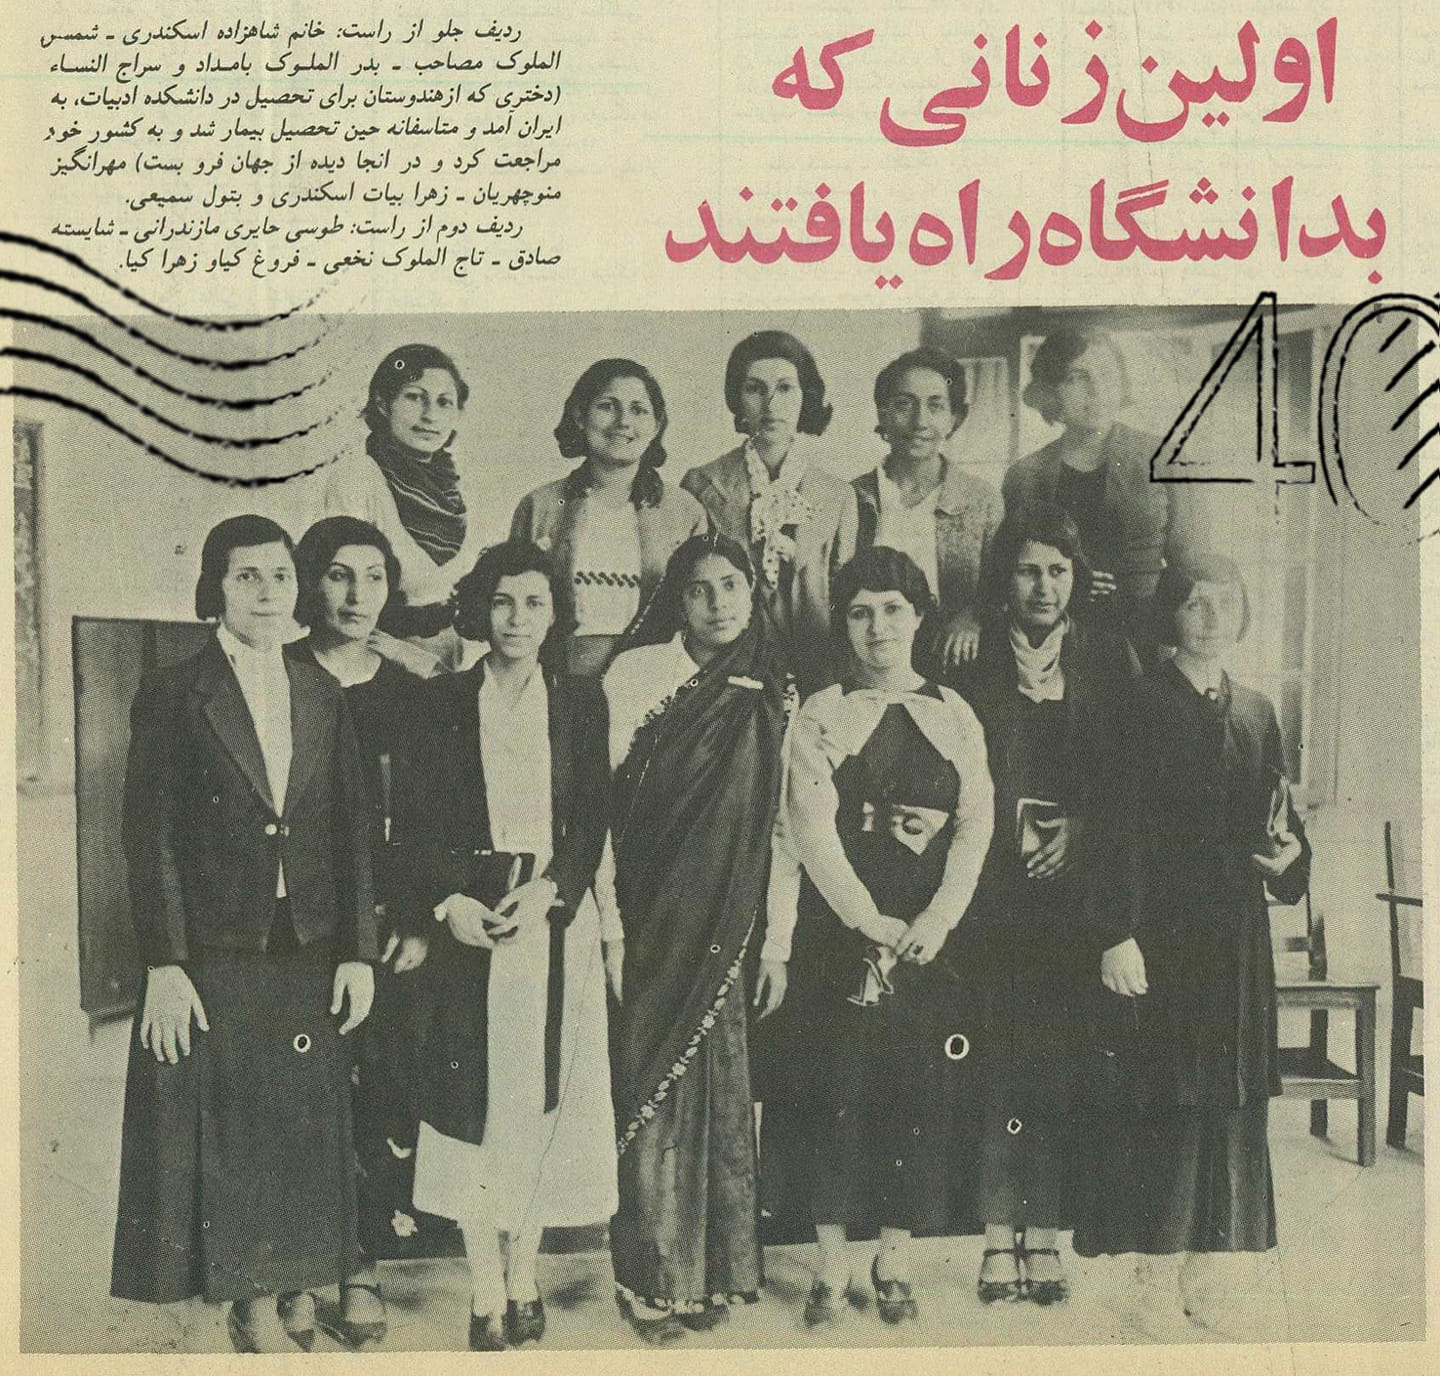 History in pictures: First group of women admitted to Tehran University, Iran (1940s).